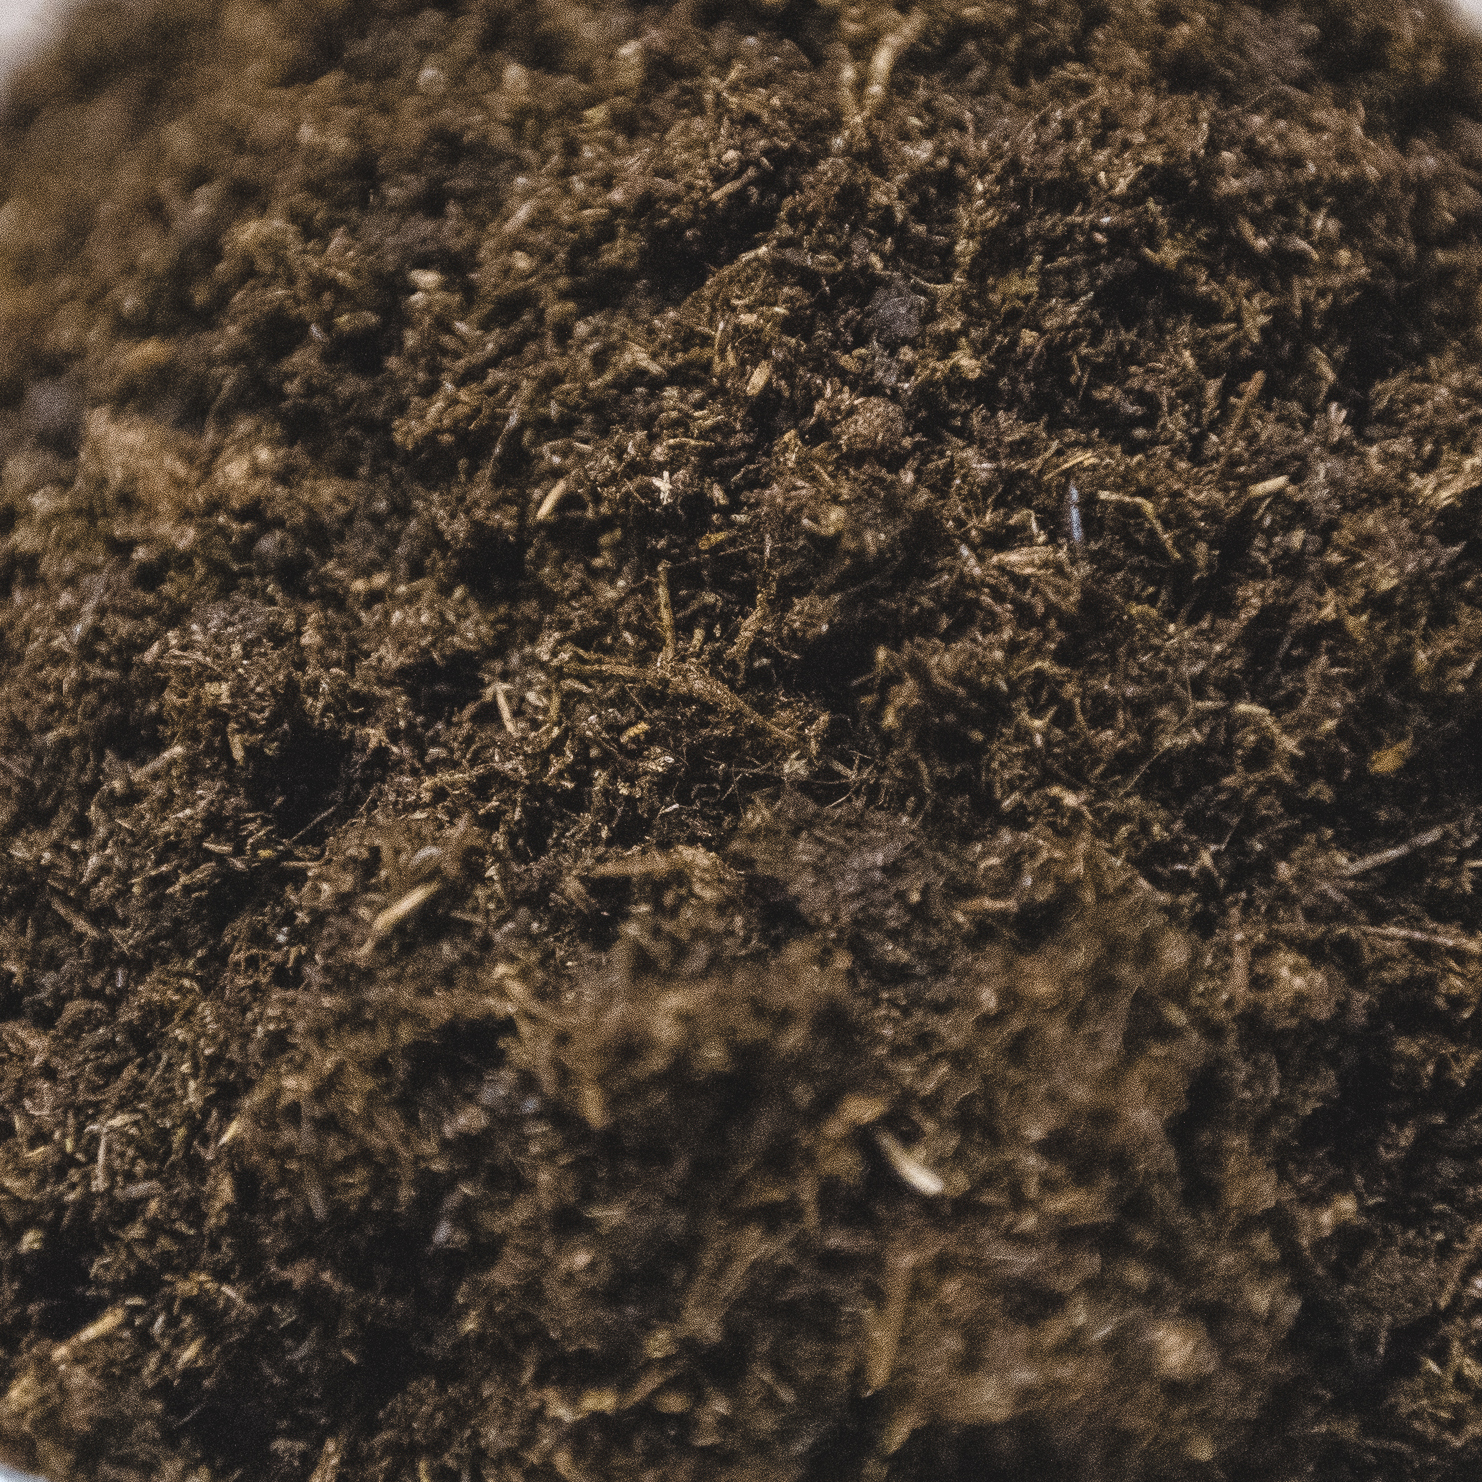 Agricultural enterprises using peat as bedding for livestock and compost